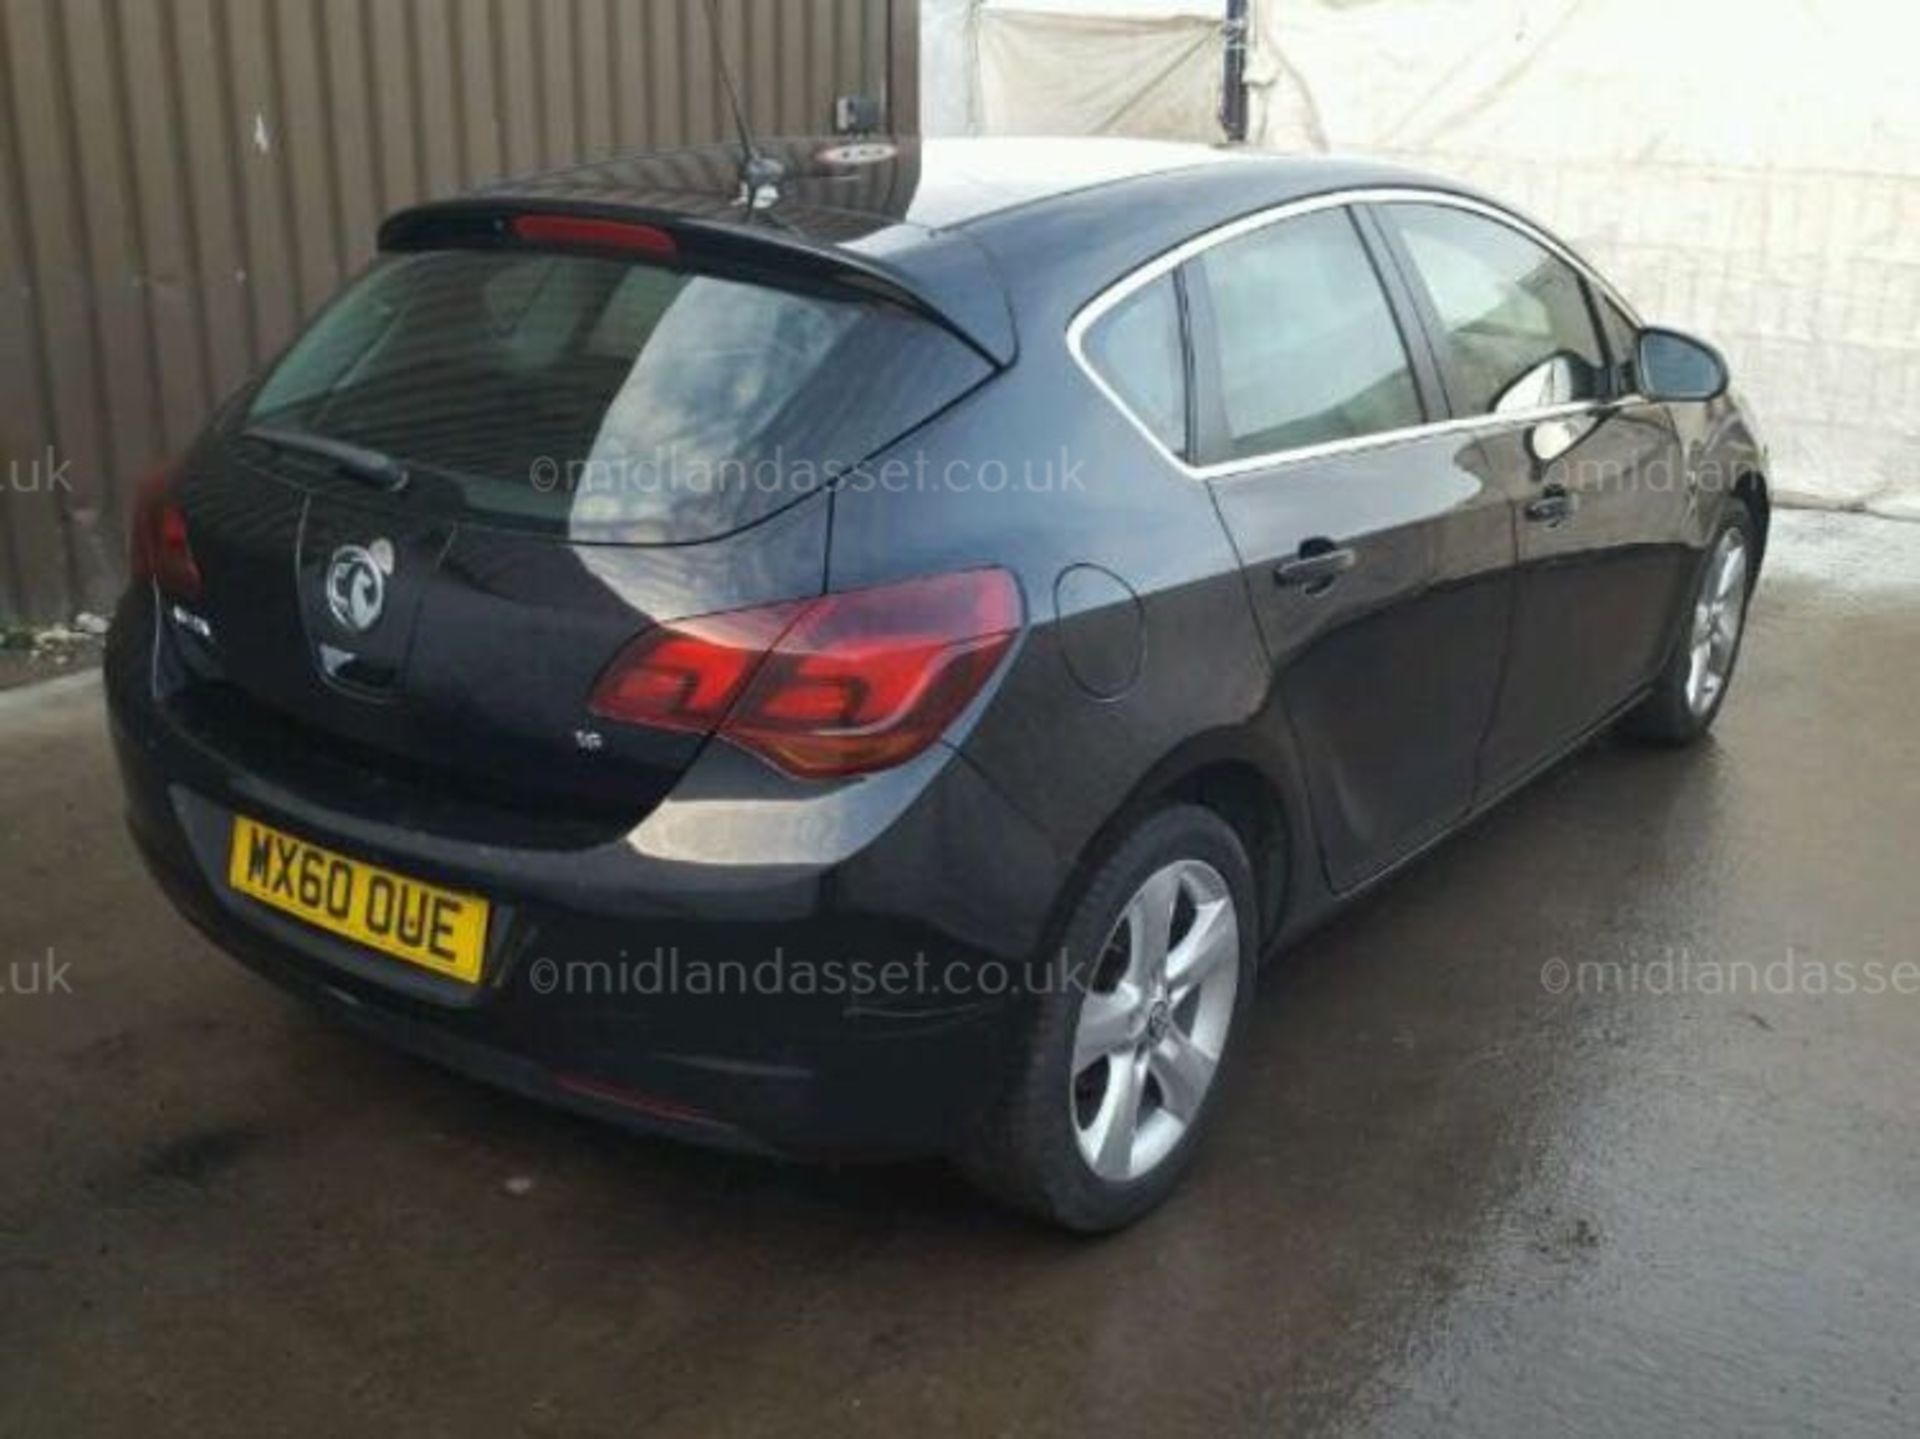 2010/60 REG VAUXHALL ASTRA SRI AUTO 5 DOOR HATCHBACK TWO FORMER KEEPERS *NO VAT*   DATE OF - Image 3 of 8